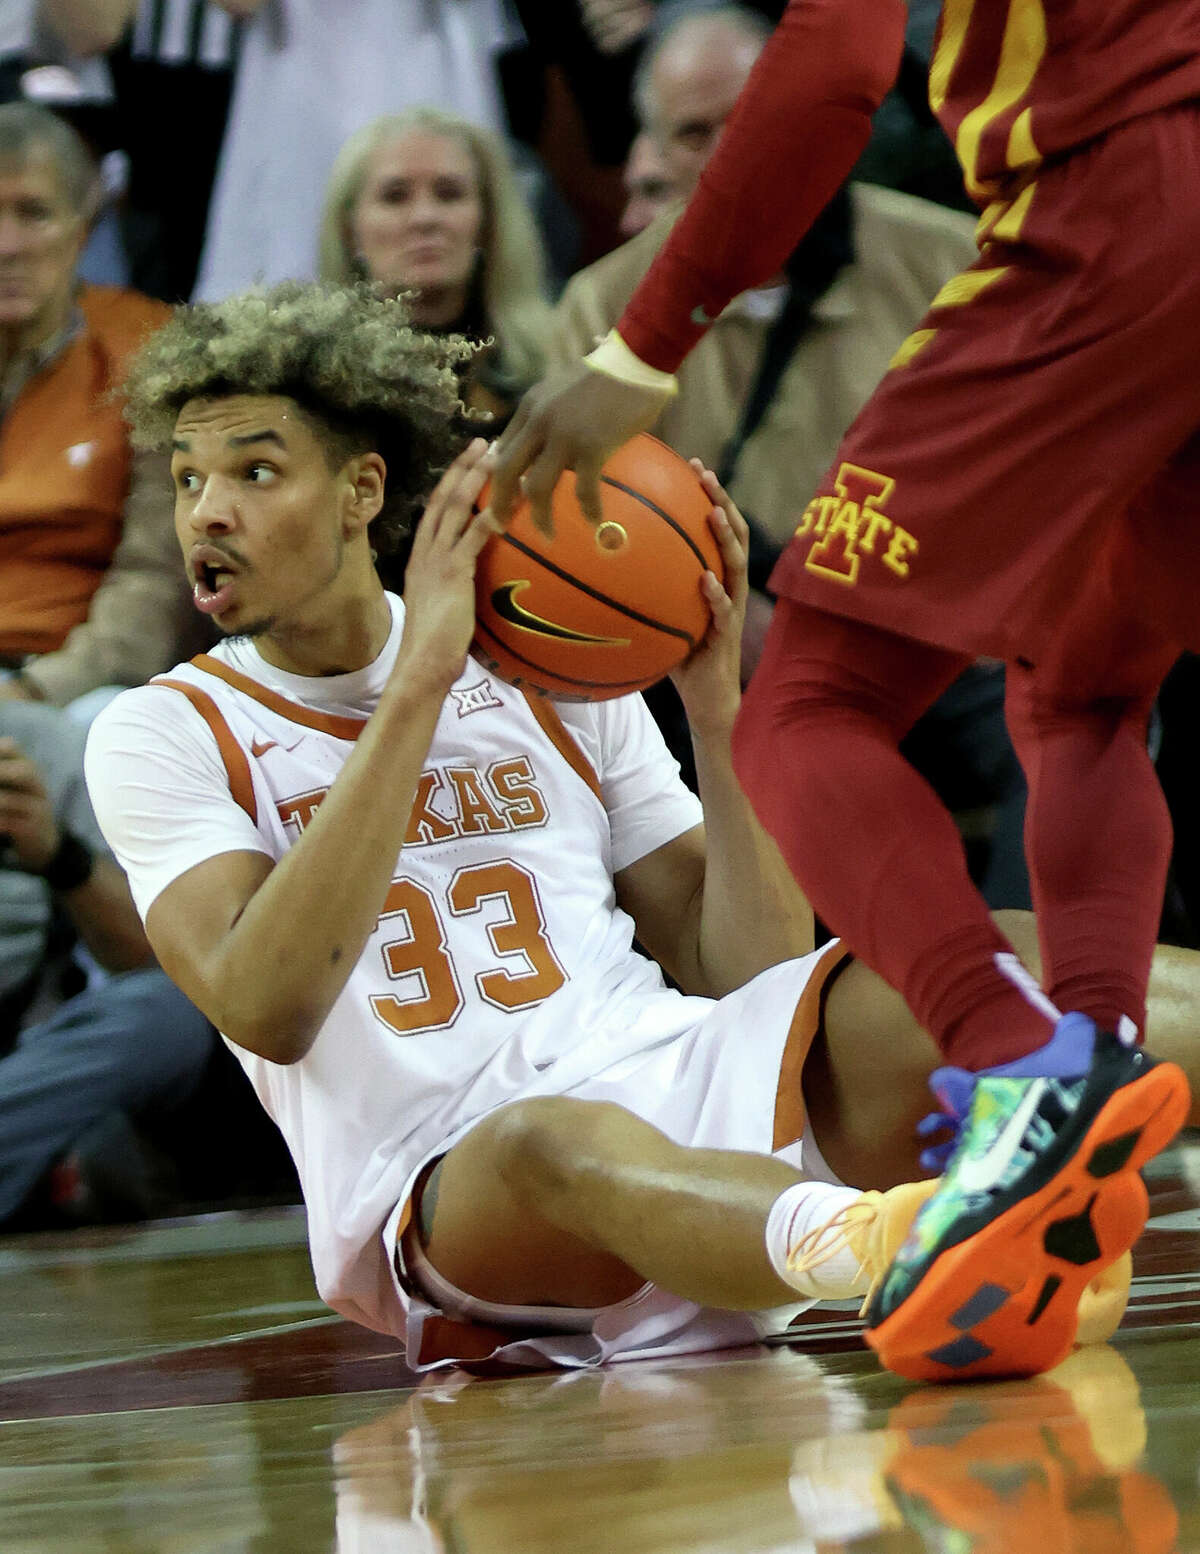 AUSTIN, TEXAS - FEBRUARY 05: Tre Mitchell #33 of the Texas Longhorns looks to pass the ball against the Iowa State Cyclones at the Frank Erwin Center on February 05, 2022 in Austin, Texas. (Photo by Chris Covatta/Getty Images)